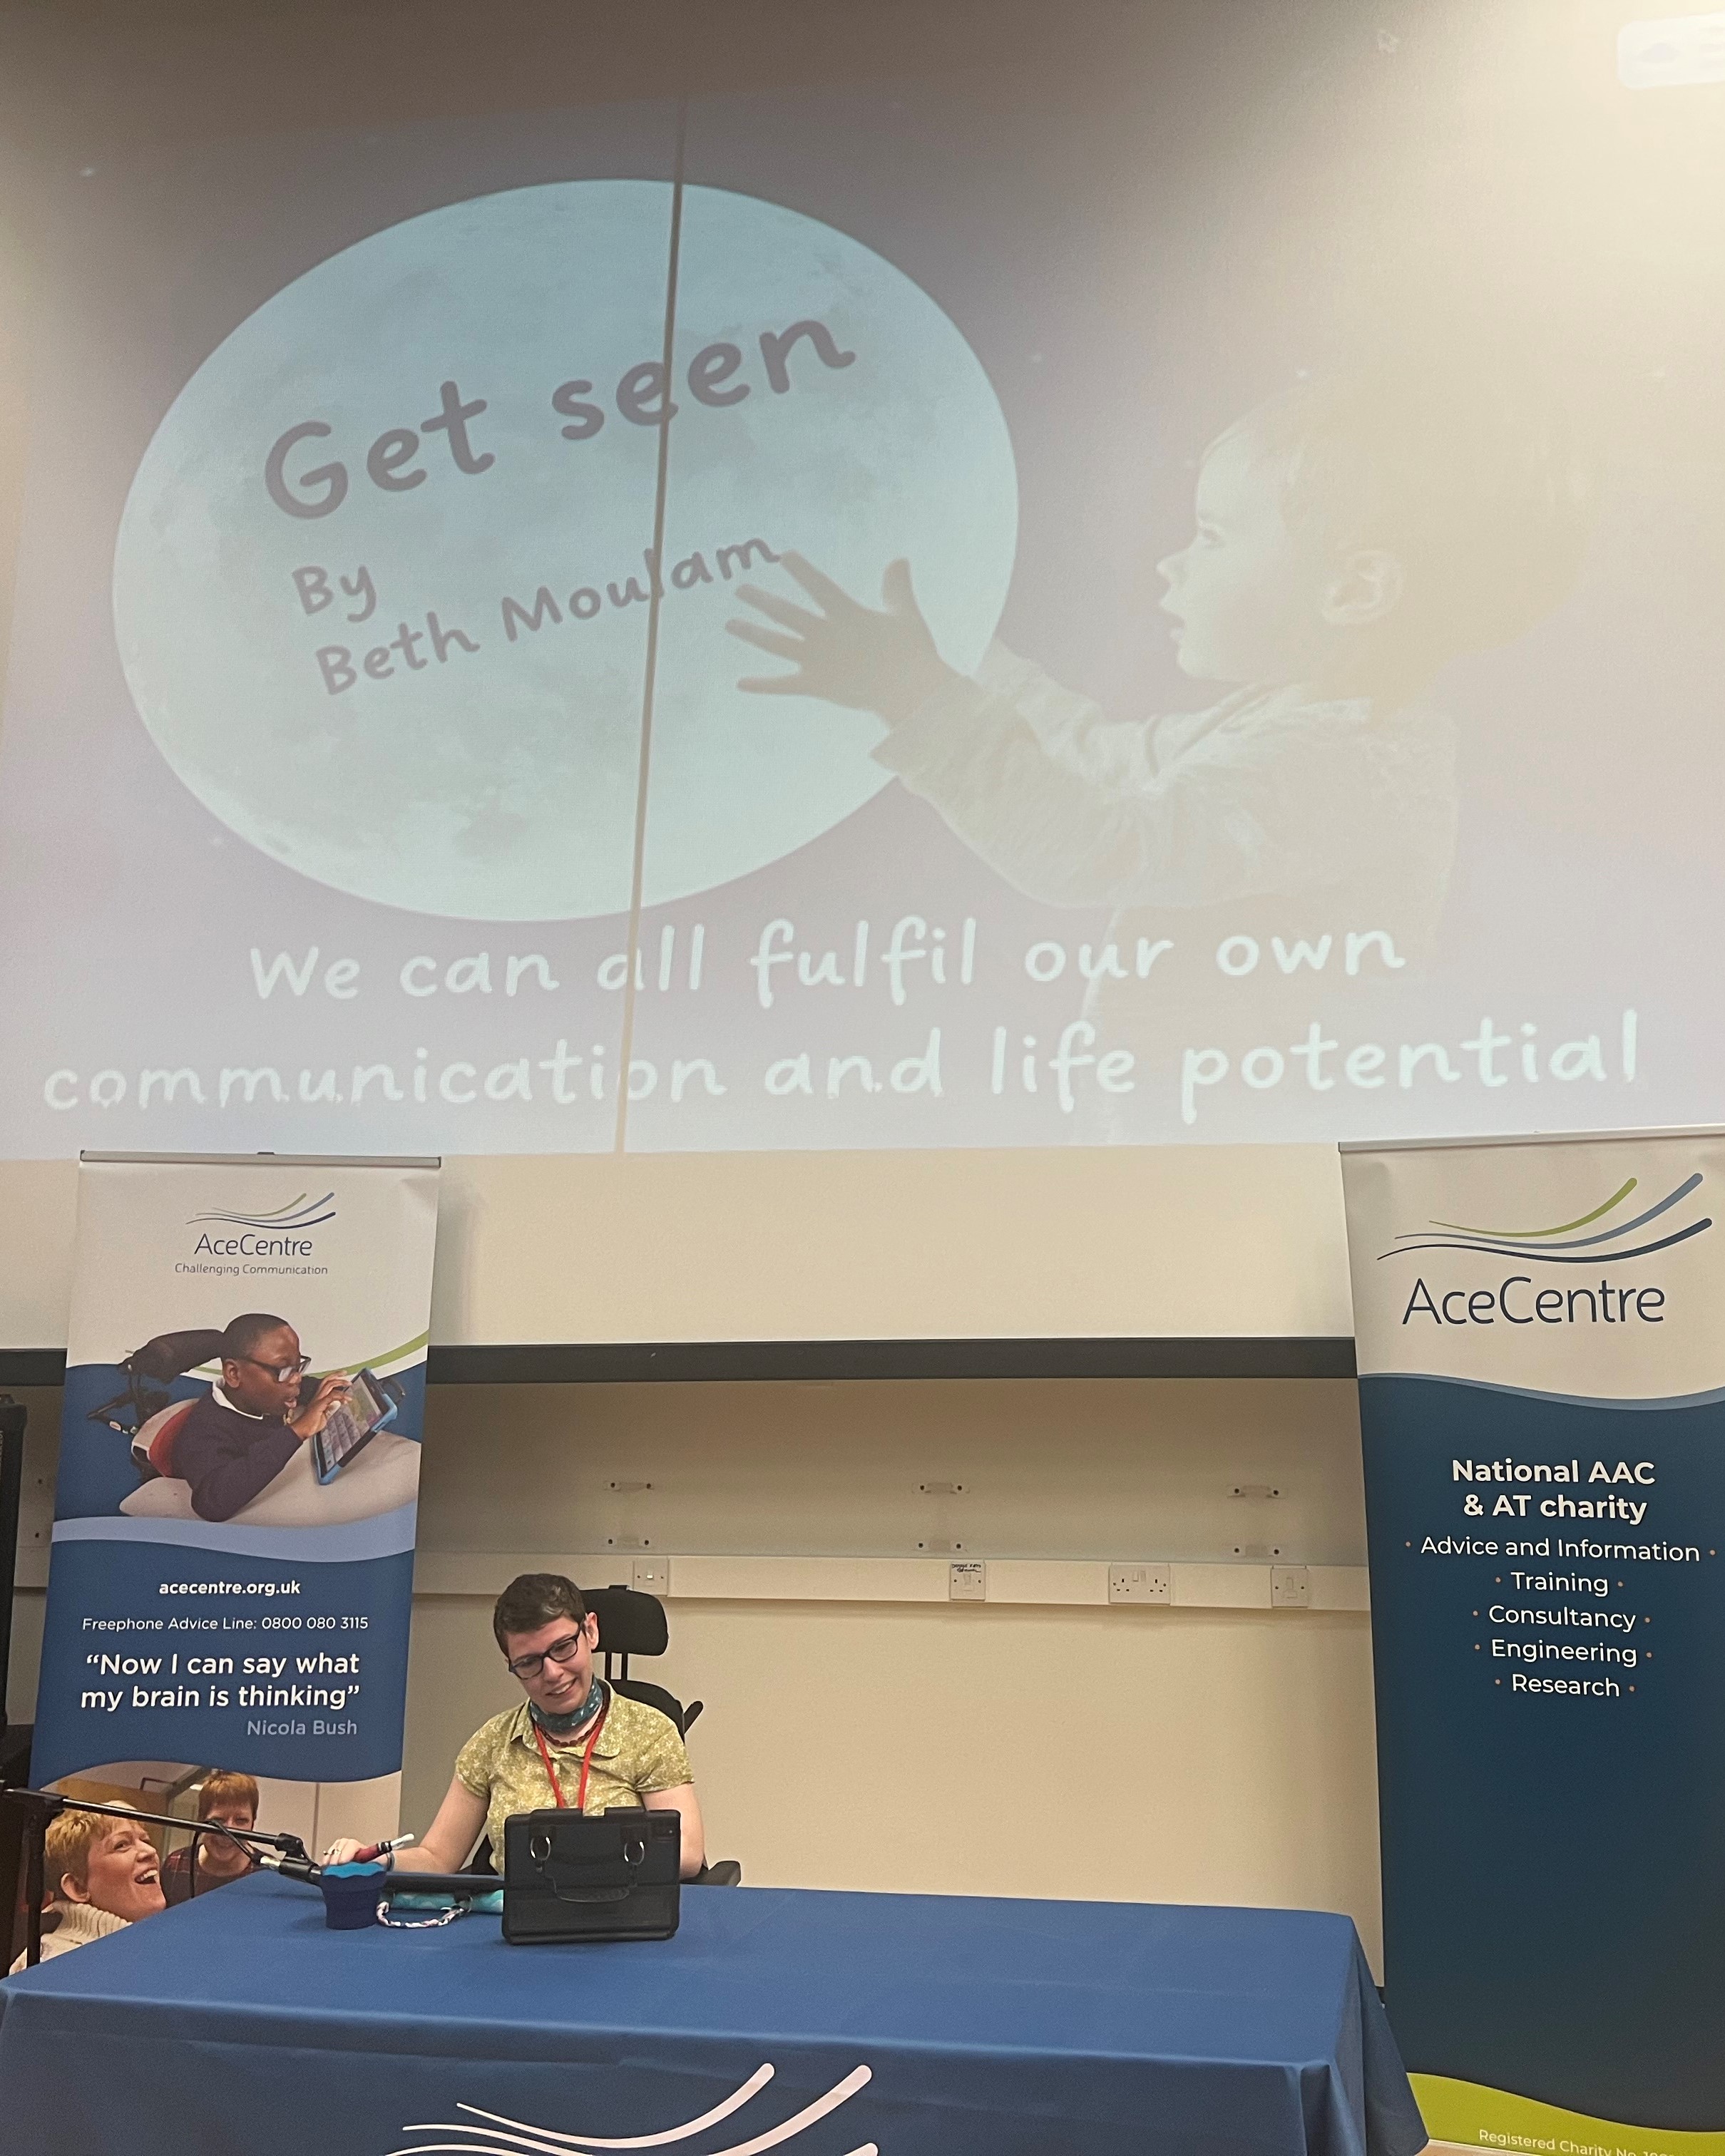 Beth Moulam sitting behind a table presenting her opening speech. There is a power point on display behind her with a picture of a child holding the moon. It says "Get Seen by Beth Moulam We can all fulfill our communication and life potential" 